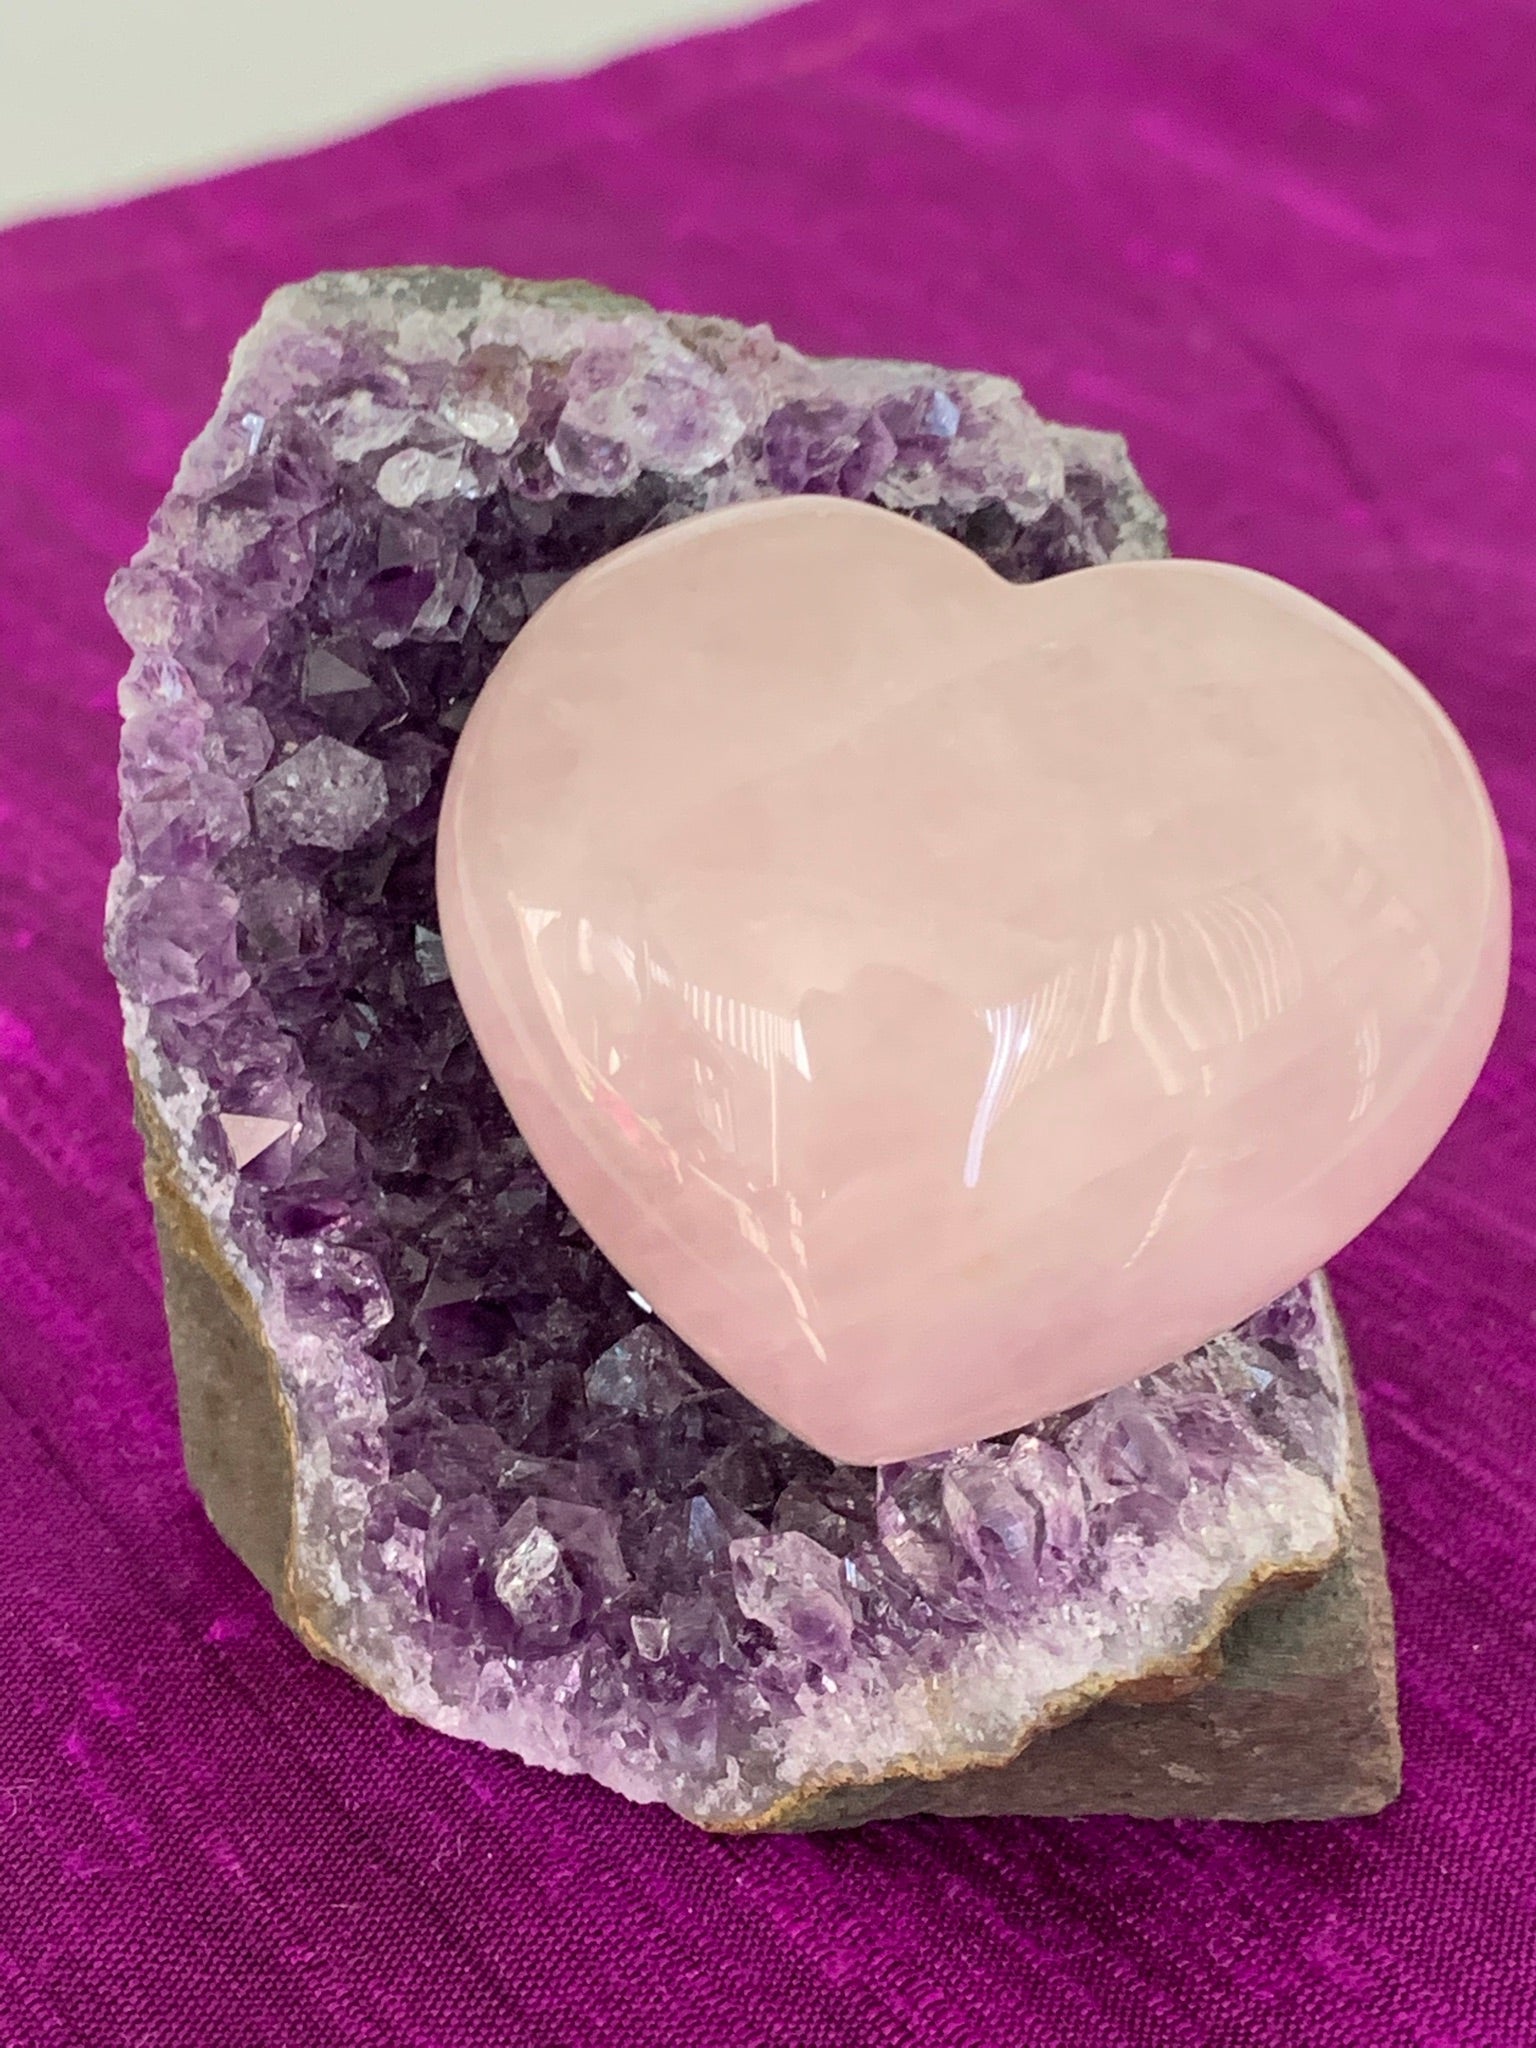 Second close Up View. High quality Rose Quartz heart is perfect for your altar, meditation space or to hold while meditating, or anywhere you want to radiate the energy of love ♥. A great gift too! Rose quartz is the "stone of unconditional love & infinite peace." It opens the heart and soothes emotional distress. Size is approximately 40mm.